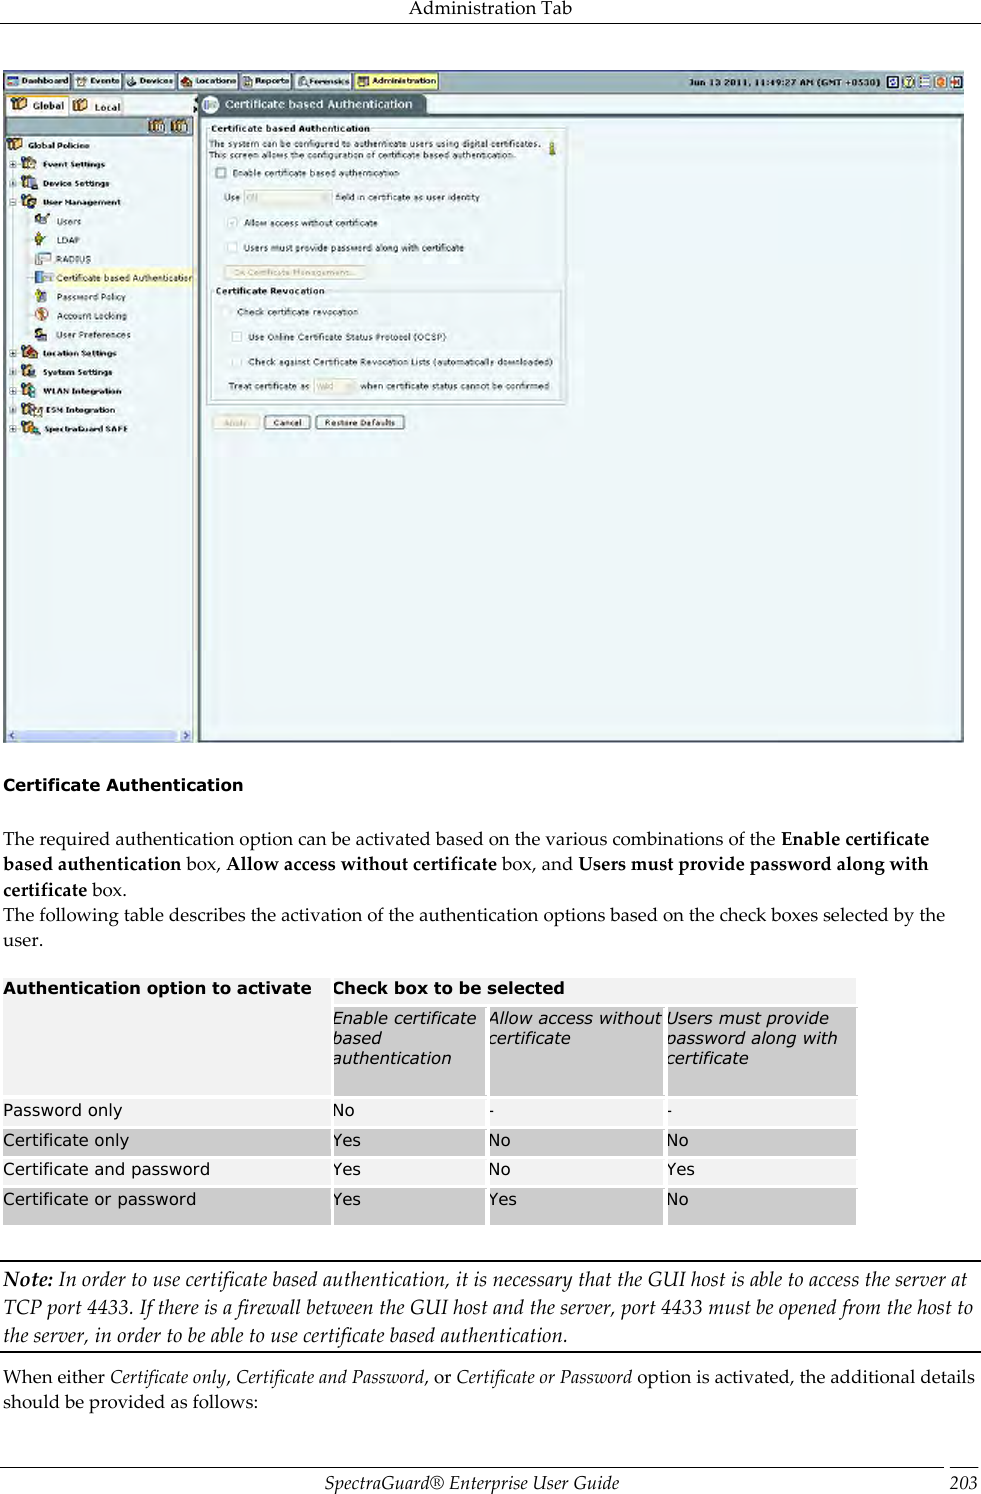 Administration Tab SpectraGuard®  Enterprise User Guide 203    Certificate Authentication   The required authentication option can be activated based on the various combinations of the Enable certificate based authentication box, Allow access without certificate box, and Users must provide password along with certificate box. The following table describes the activation of the authentication options based on the check boxes selected by the user.   Authentication option to activate Check box to be selected Enable certificate based authentication Allow access without certificate Users must provide password along with certificate Password only No - - Certificate only Yes No No Certificate and password Yes No Yes Certificate or password Yes Yes No   Note: In order to use certificate based authentication, it is necessary that the GUI host is able to access the server at TCP port 4433. If there is a firewall between the GUI host and the server, port 4433 must be opened from the host to the server, in order to be able to use certificate based authentication. When either Certificate only, Certificate and Password, or Certificate or Password option is activated, the additional details should be provided as follows: 